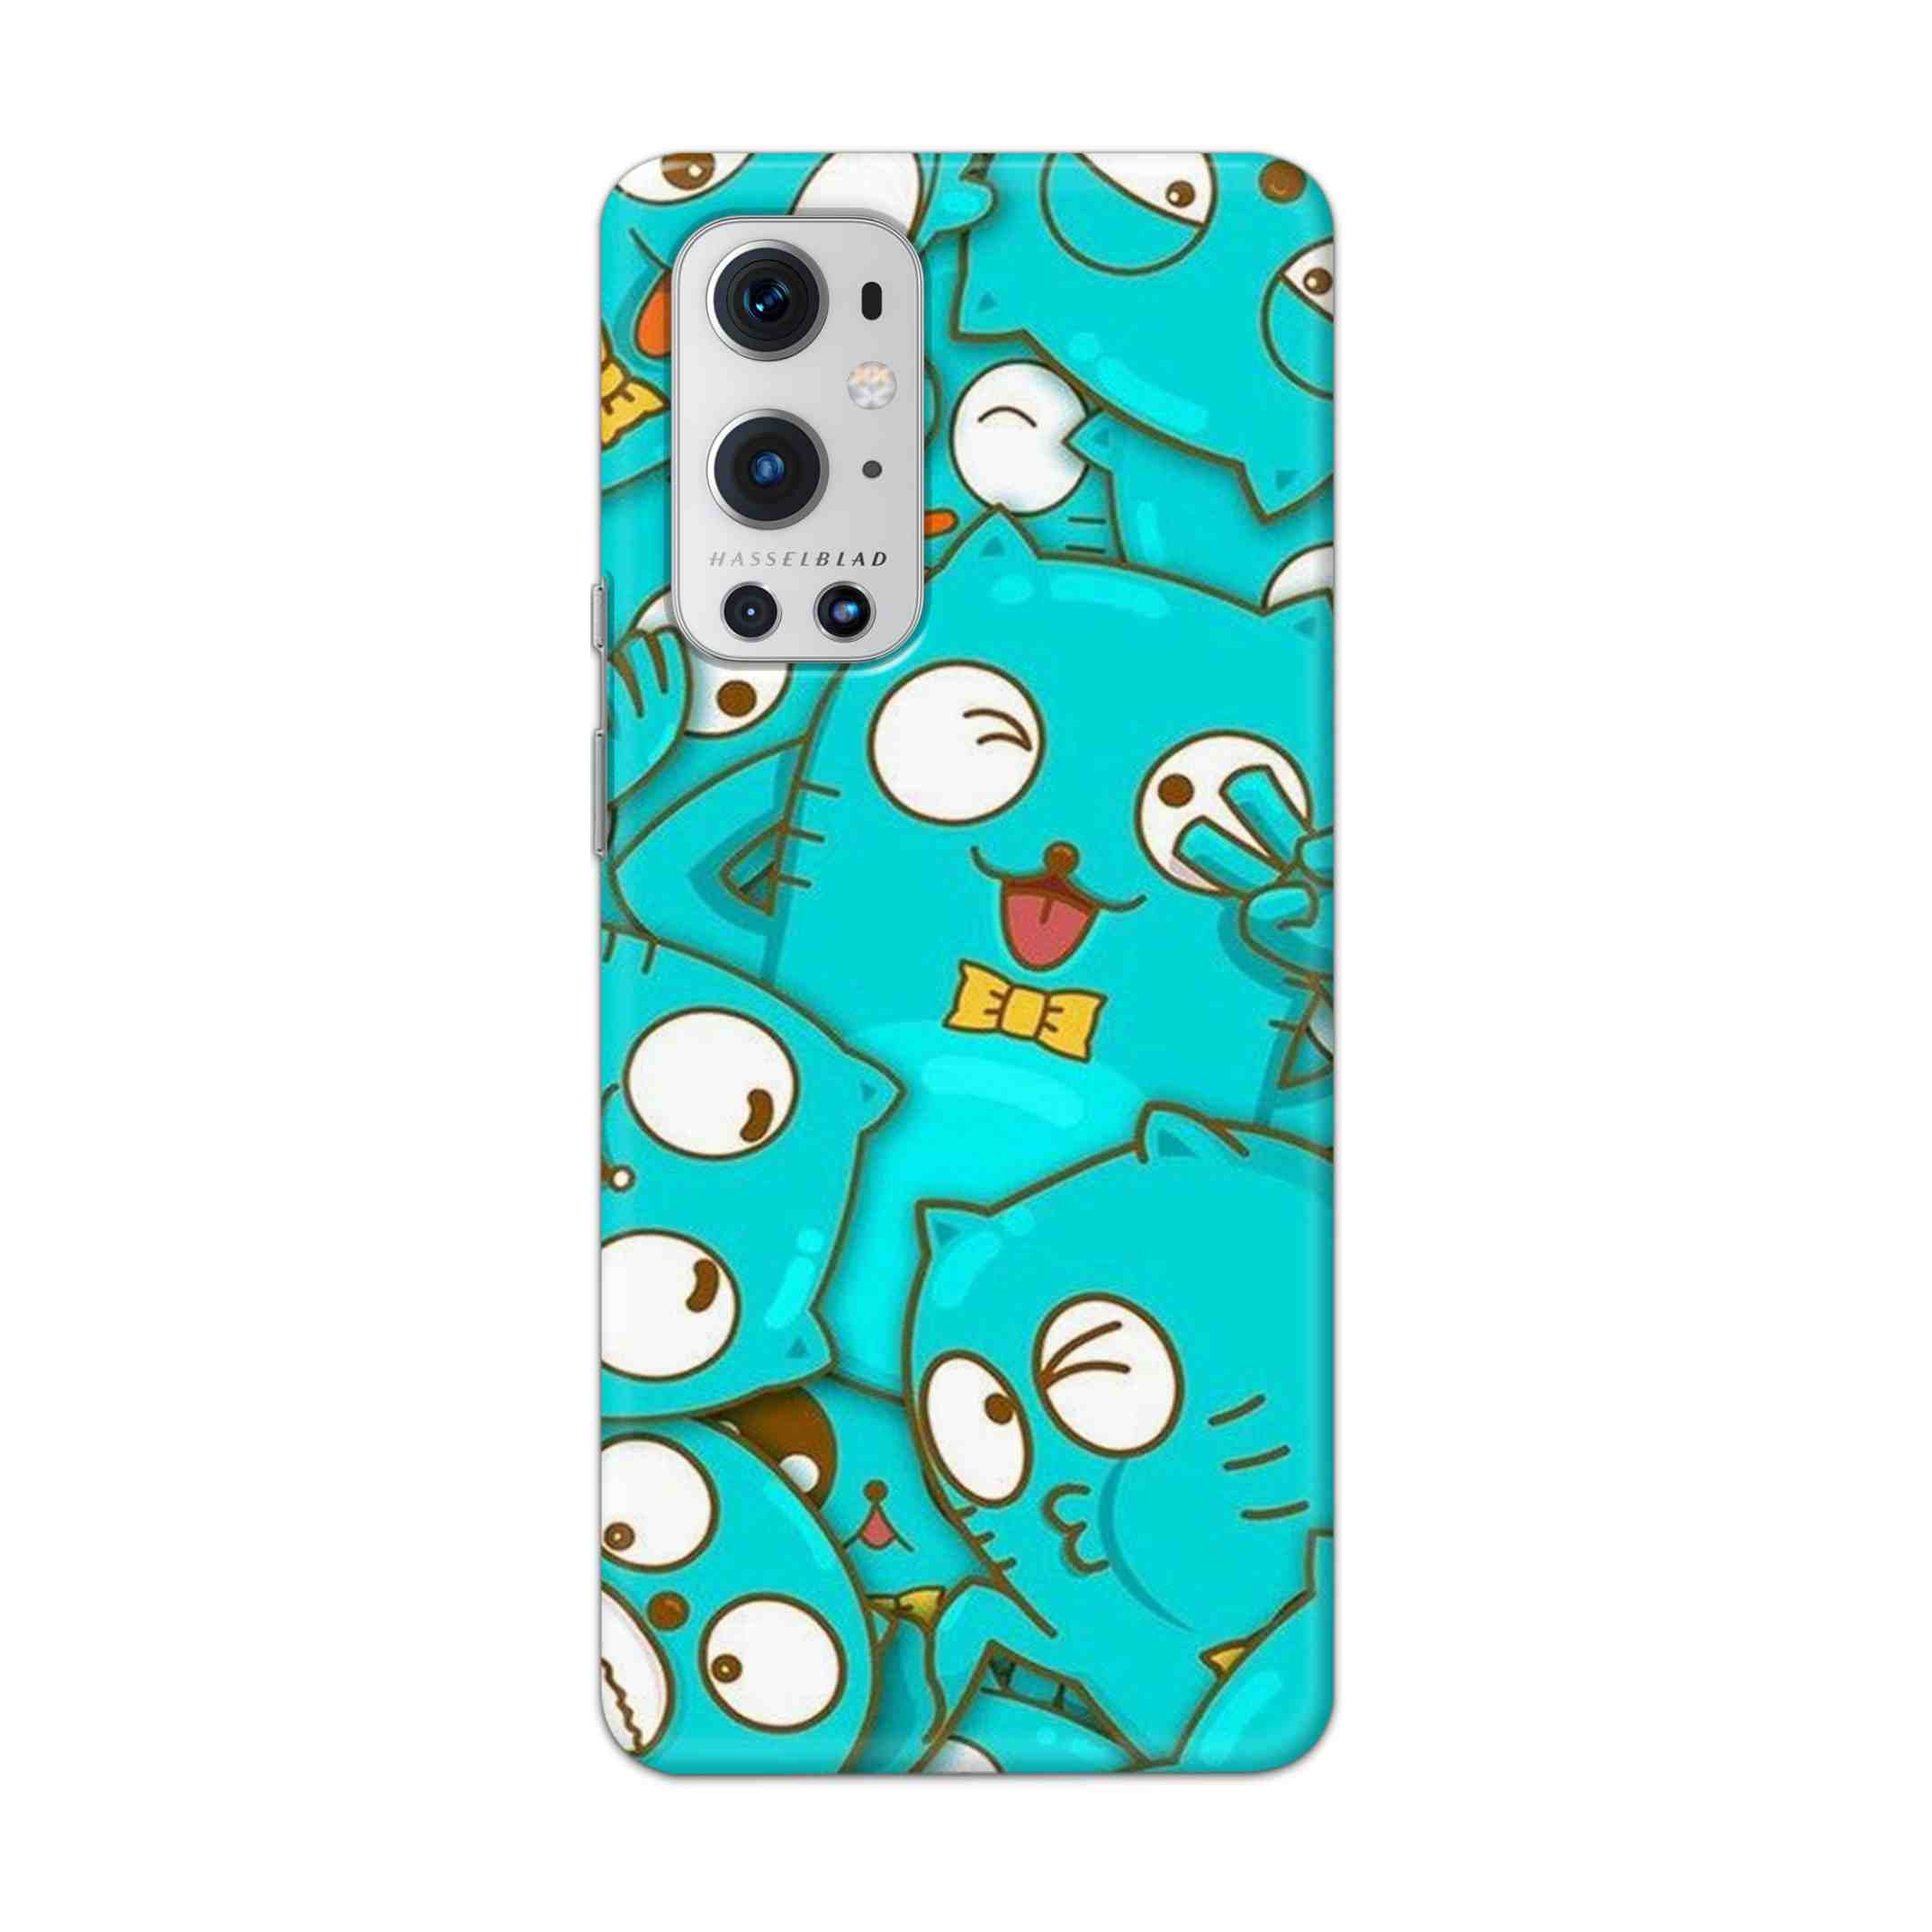 Buy Cat Hard Back Mobile Phone Case Cover For OnePlus 9 Pro Online